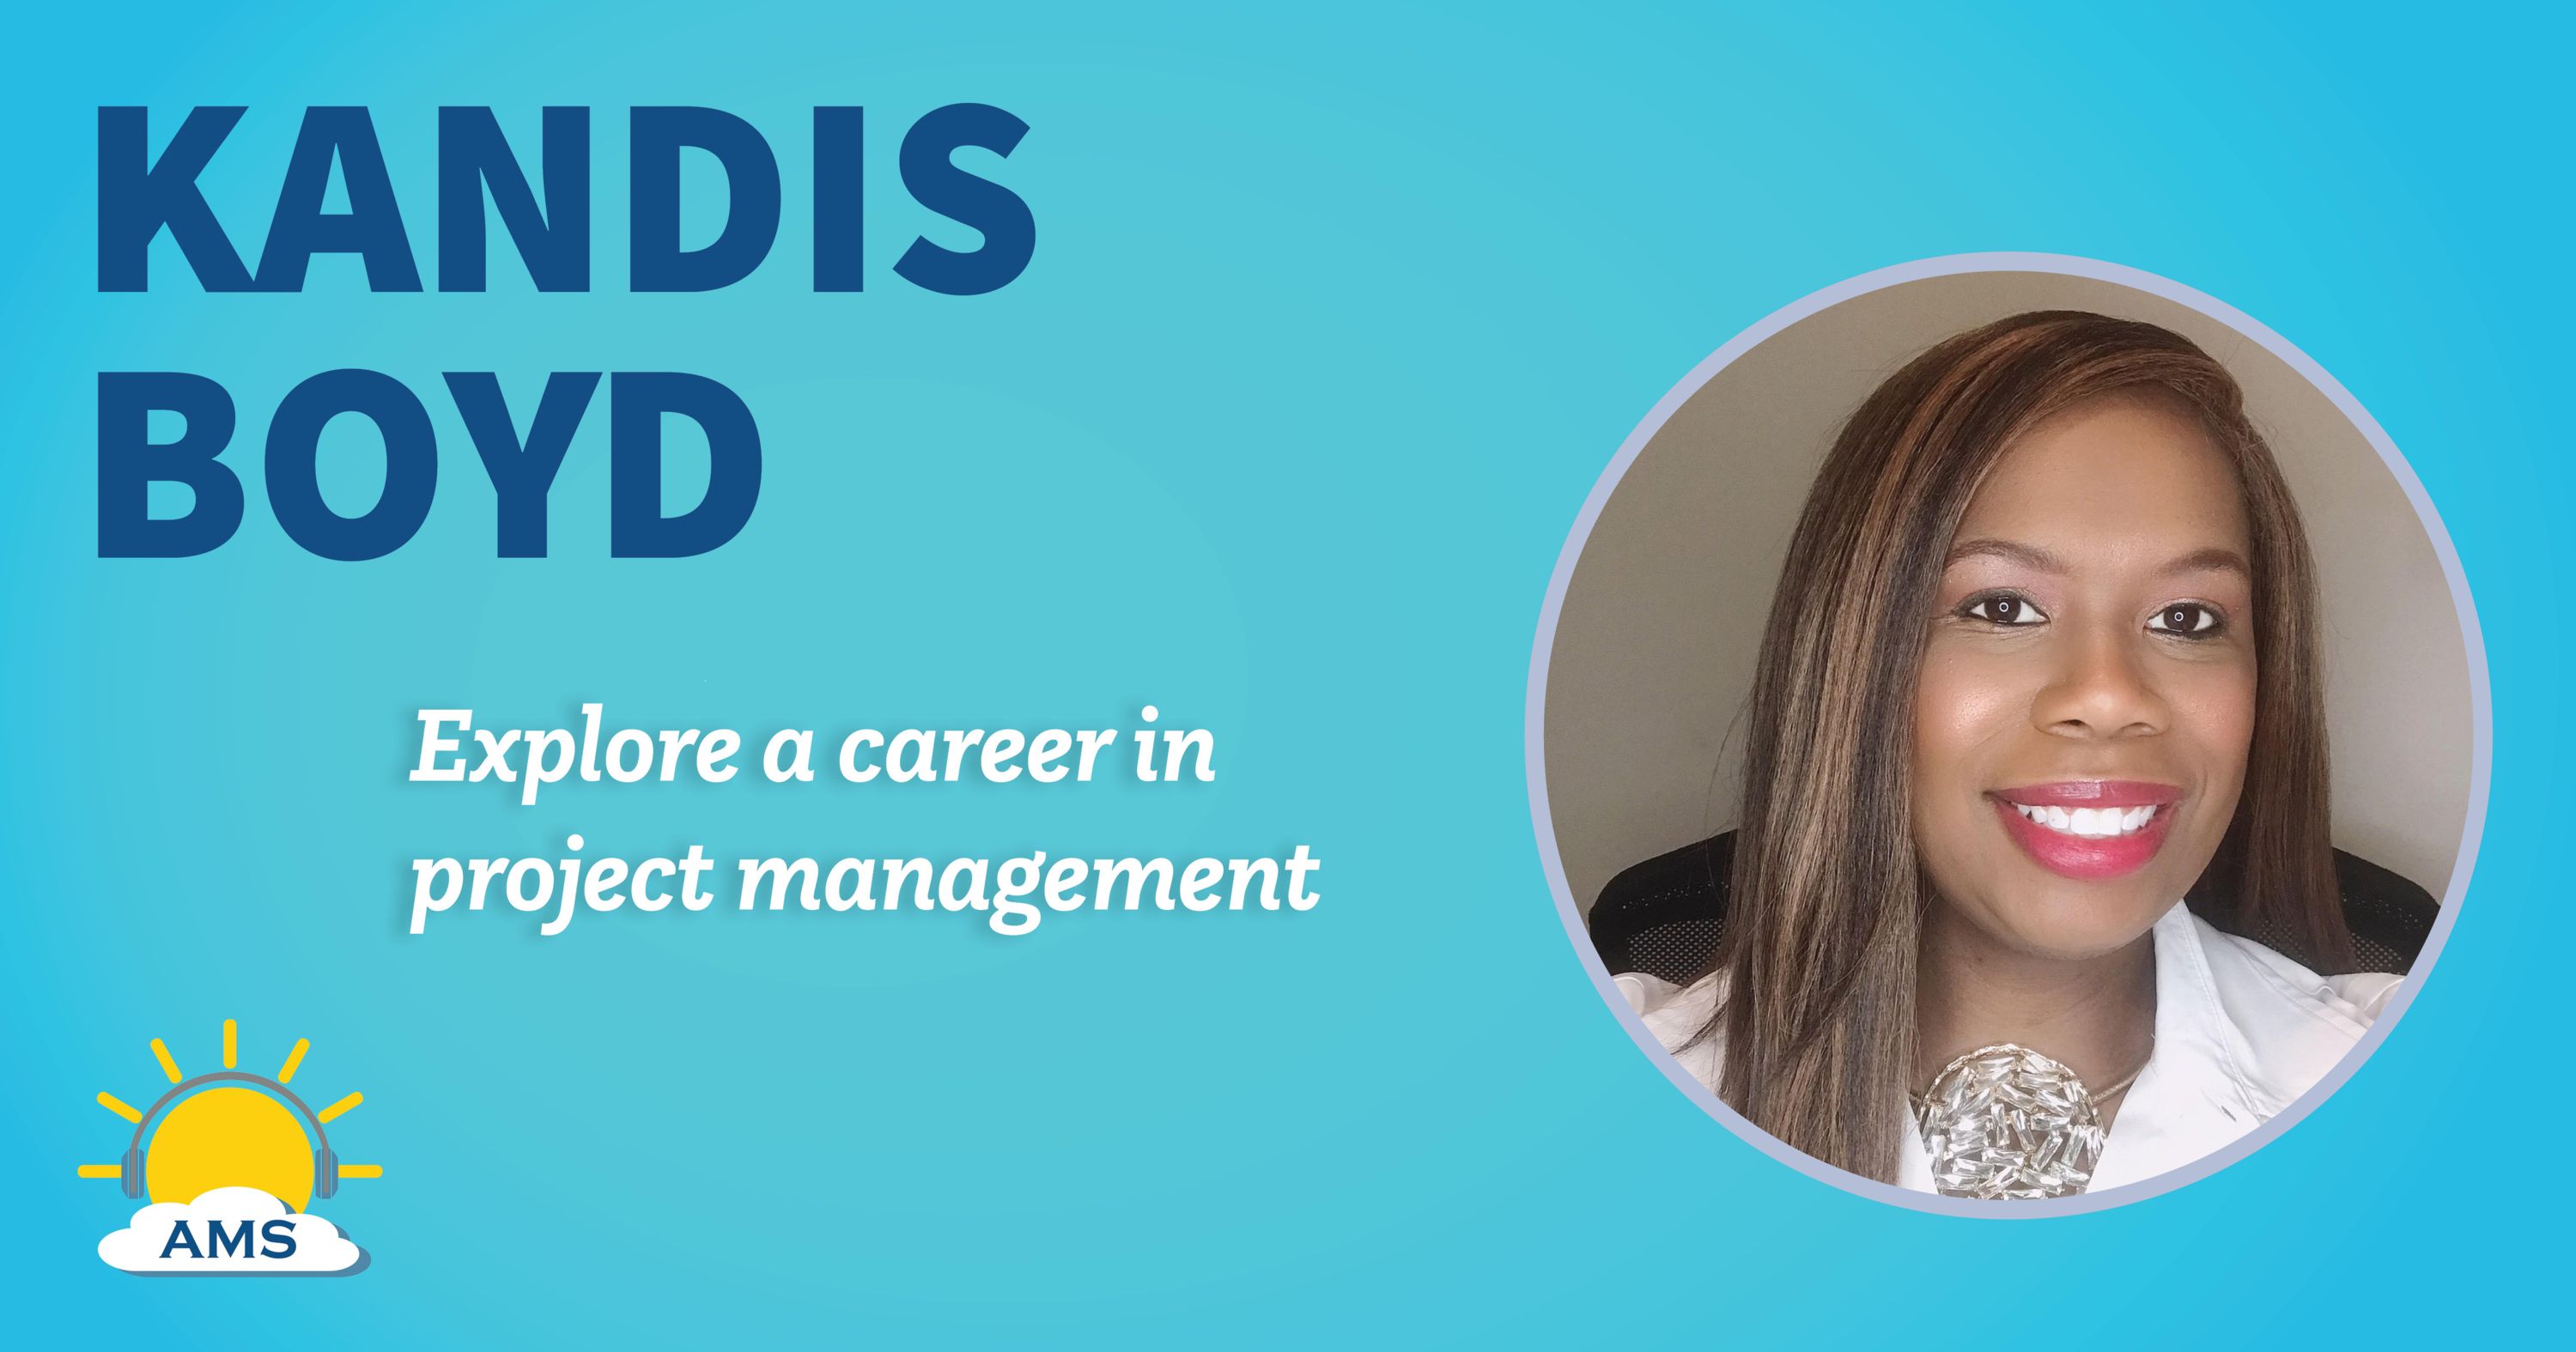 kandis boyd headshot graphic with teaser text that reads "explore a career in project management"